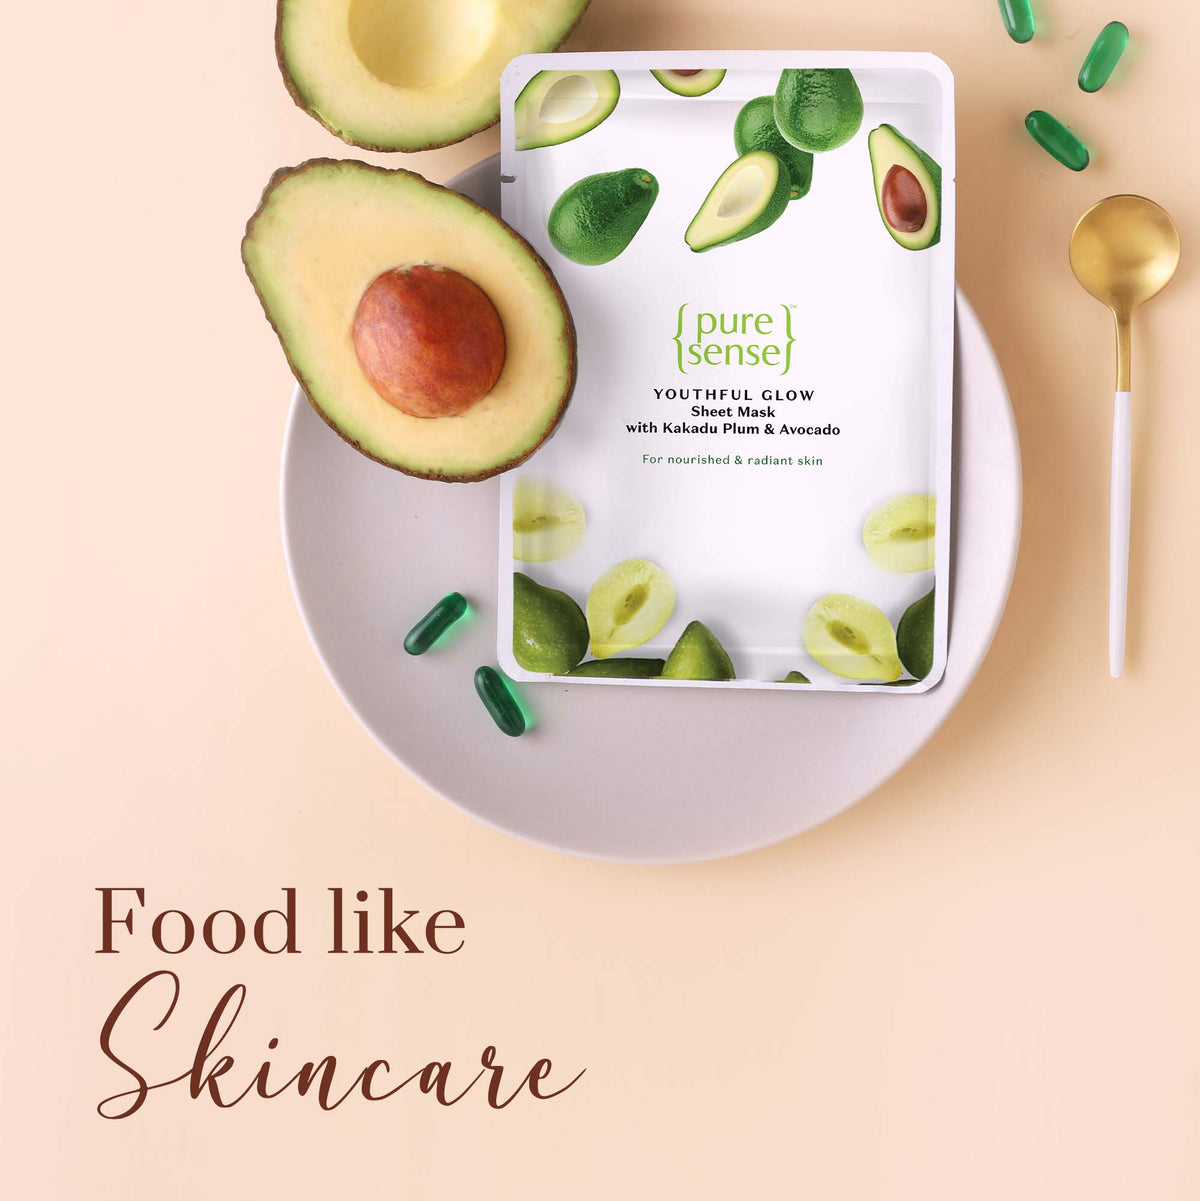 Anti-Ageing Sheet Mask with Kakadu Plum & Avocado  |  From the makers of Parachute Advansed | 15ml